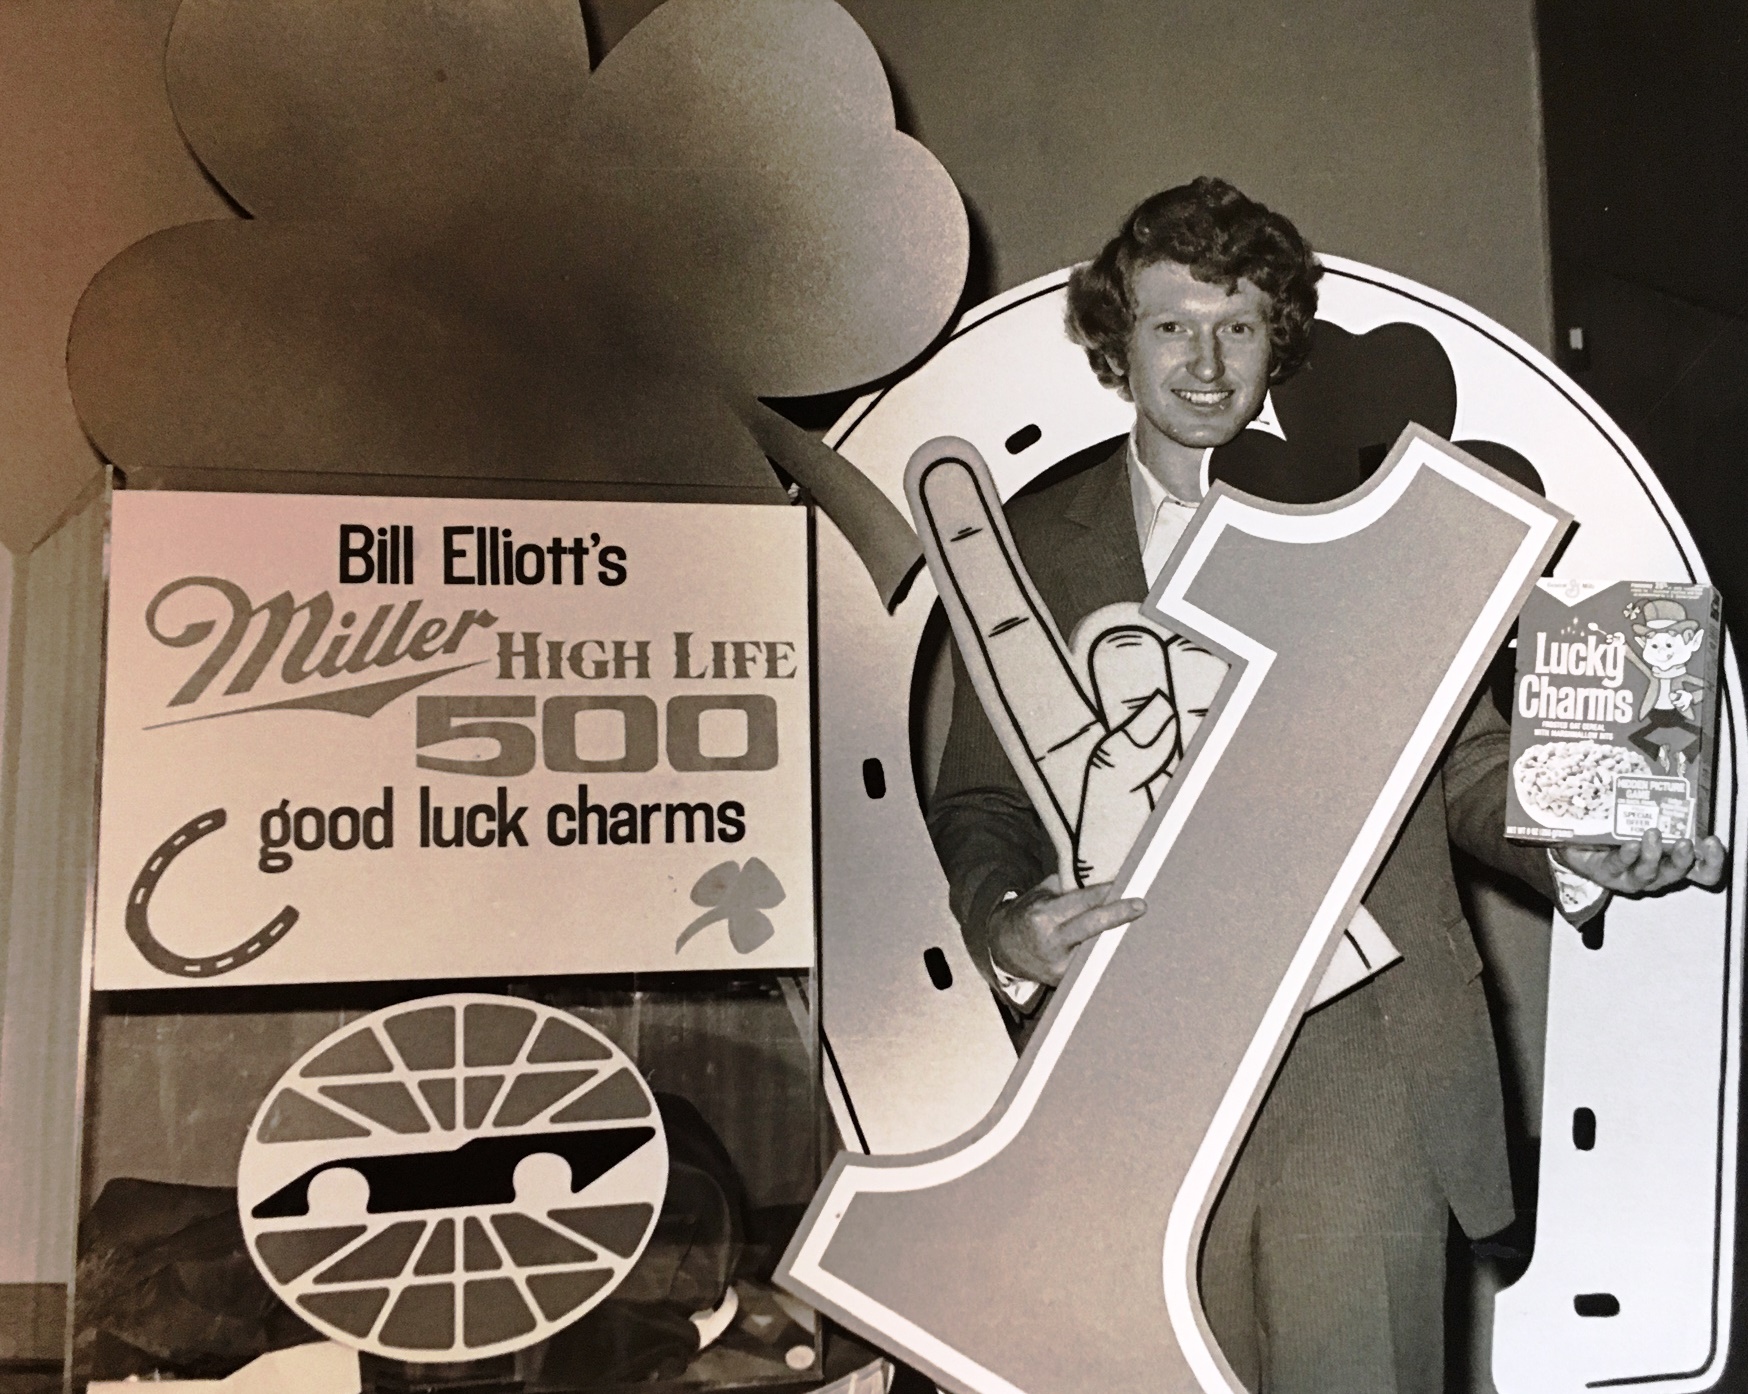 Bill Elliott, father of Chase Elliott, was the center of his own "lucky charm" promotion in 1983 as he sought his first career Winston Cup Series victory after going winless in his first 115 races.